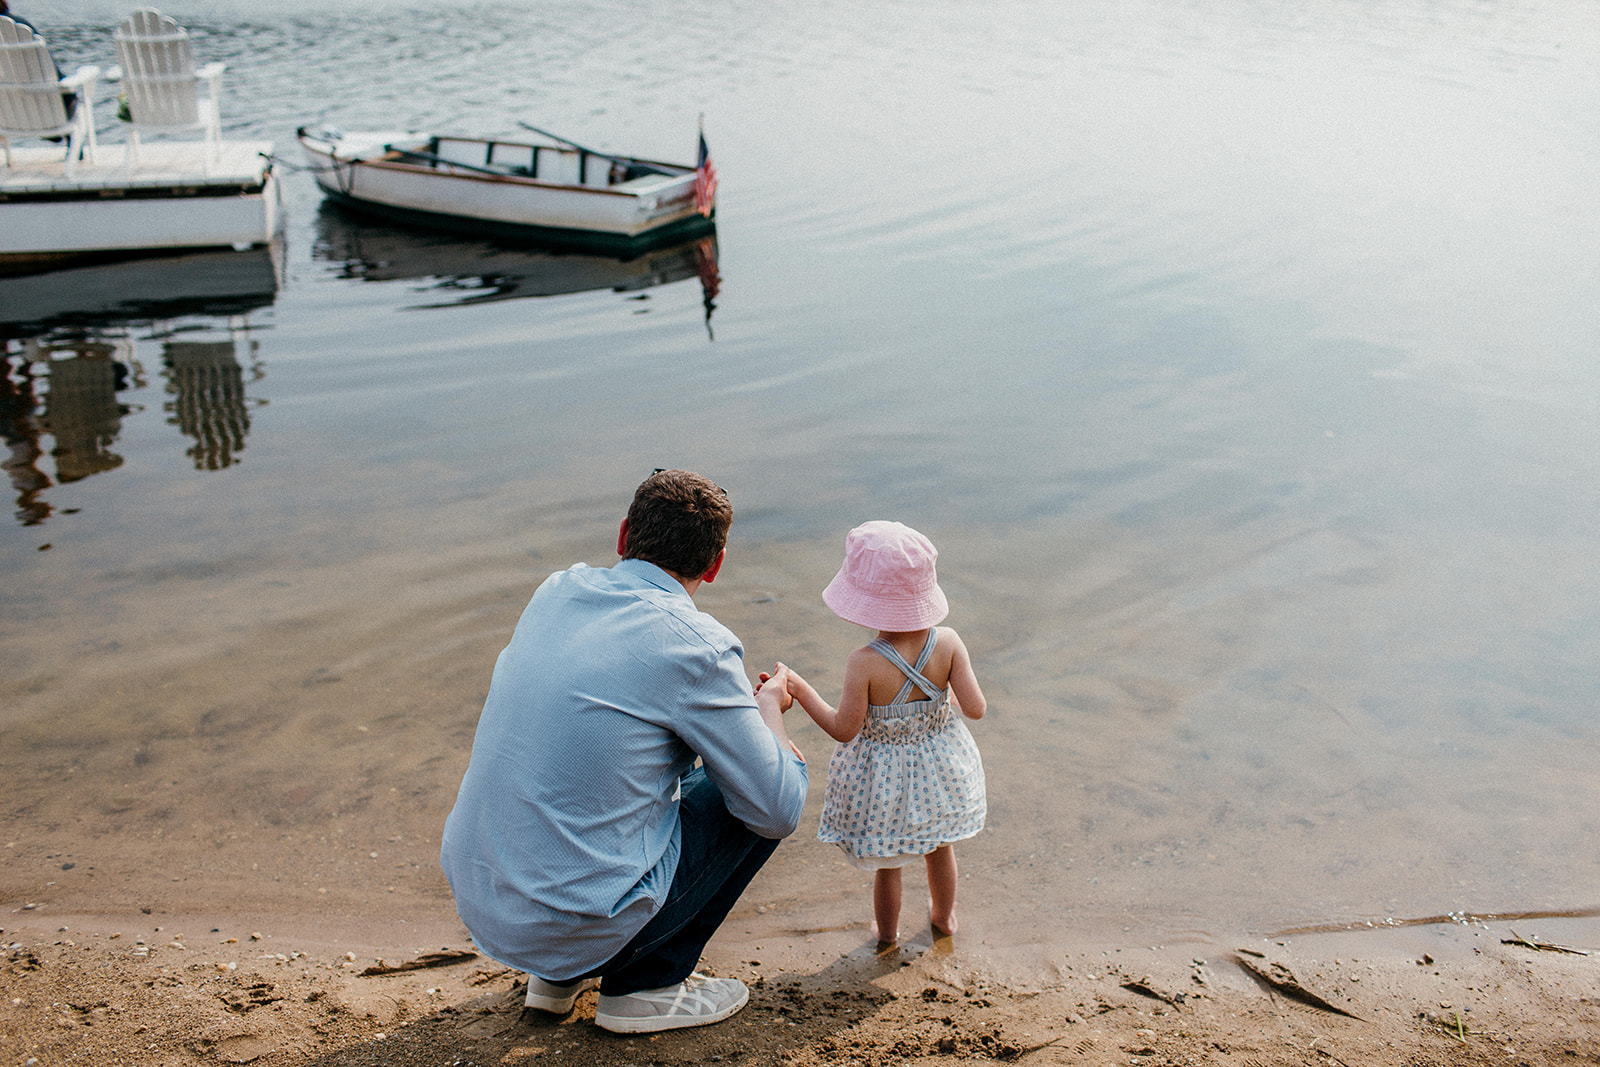 A dad and his daughter throw some stones into Camp Wandawega's lake during a wedding weekend